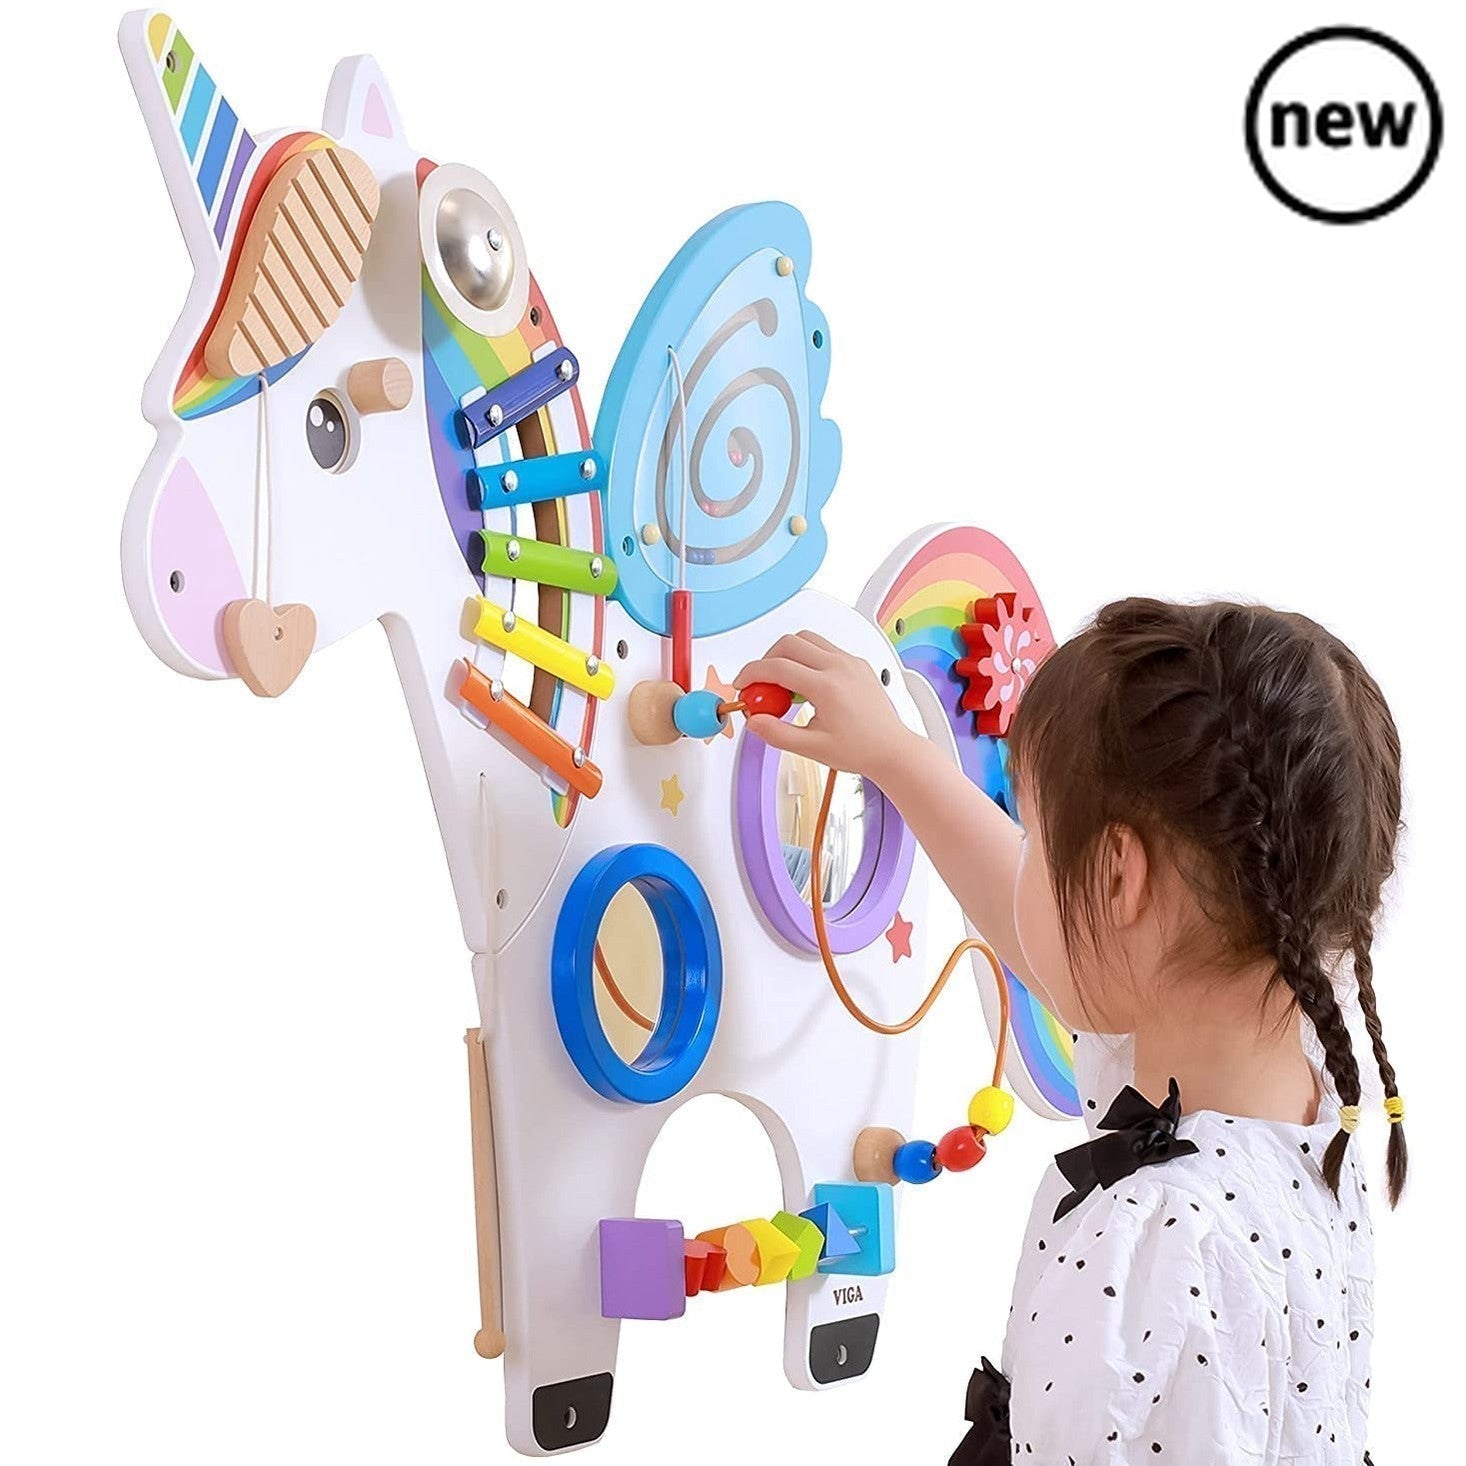 Activity Wall Panel Unicorn, The Activity Wall Panel Unicorn is ideal for the wall at home, waiting room, treatment rooms or in your nursery or school. The Activity Wall Panel Unicorn is Ideal for developing hand-eye co-ordination, finger control and fine motor skills. Wall fixings included. The Activity Wall Panel Unicorn also provides problem solving challenges appropriate to young children whilst engaging children in conversations about what they are doing. This beautifully designed unicorn wall toy incl